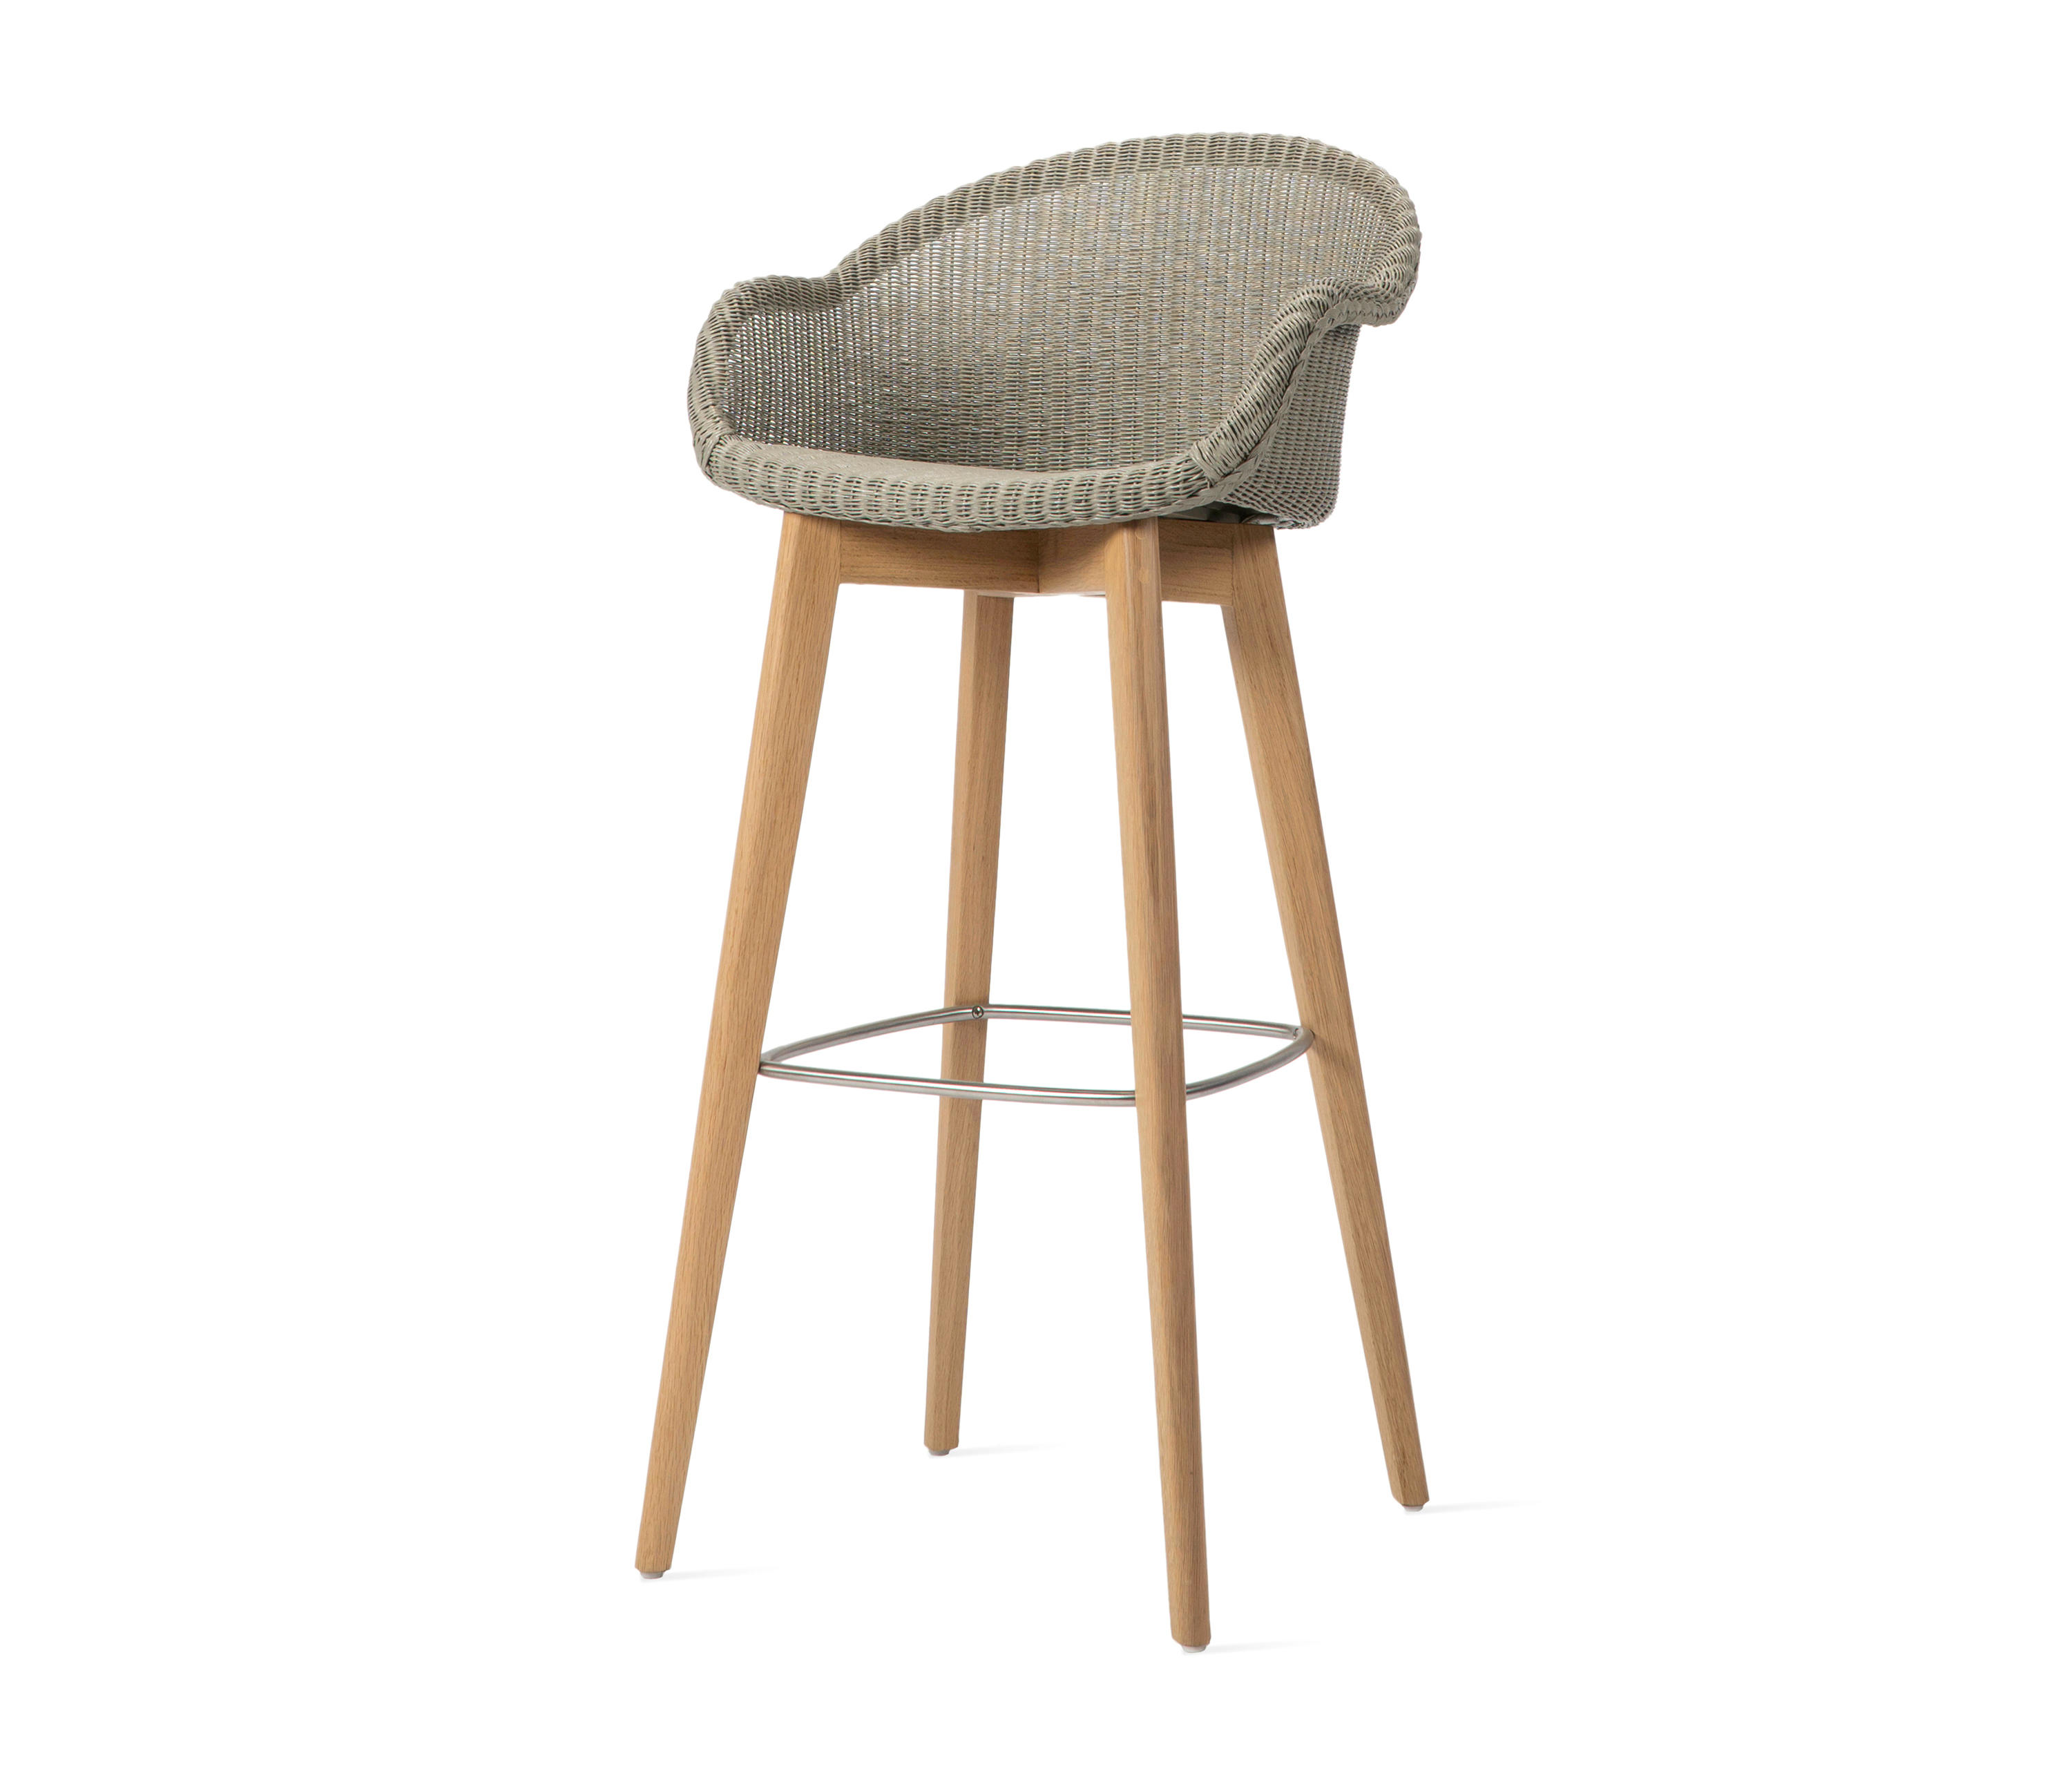 Lloyd Loom Bar Stools of all time Learn more here | stoolz